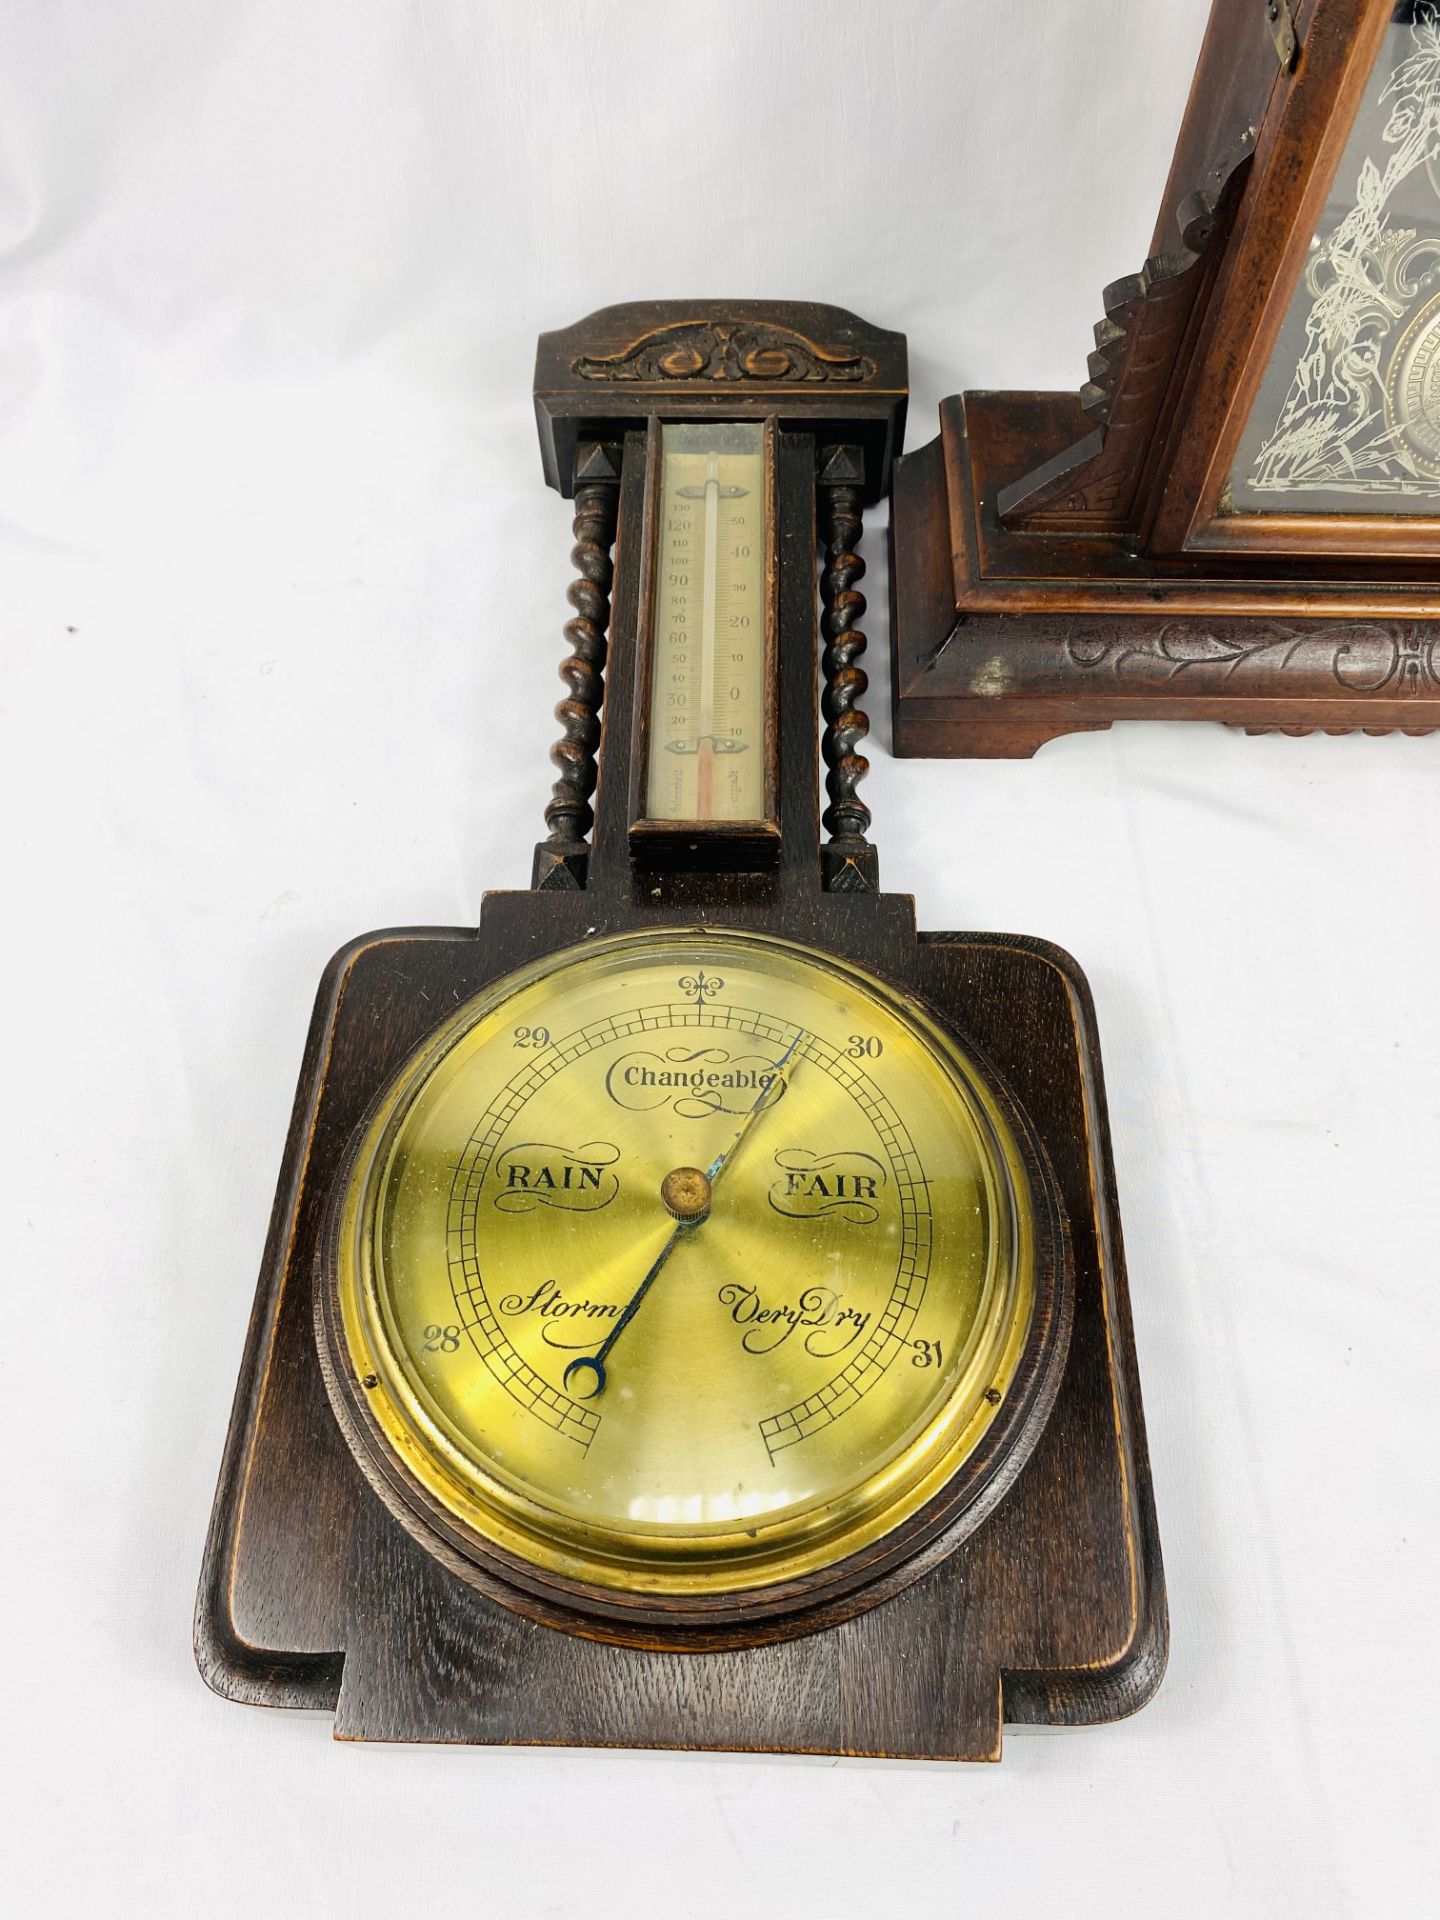 Wood cased mantel clock together with a wall mounted barometer - Image 6 of 6